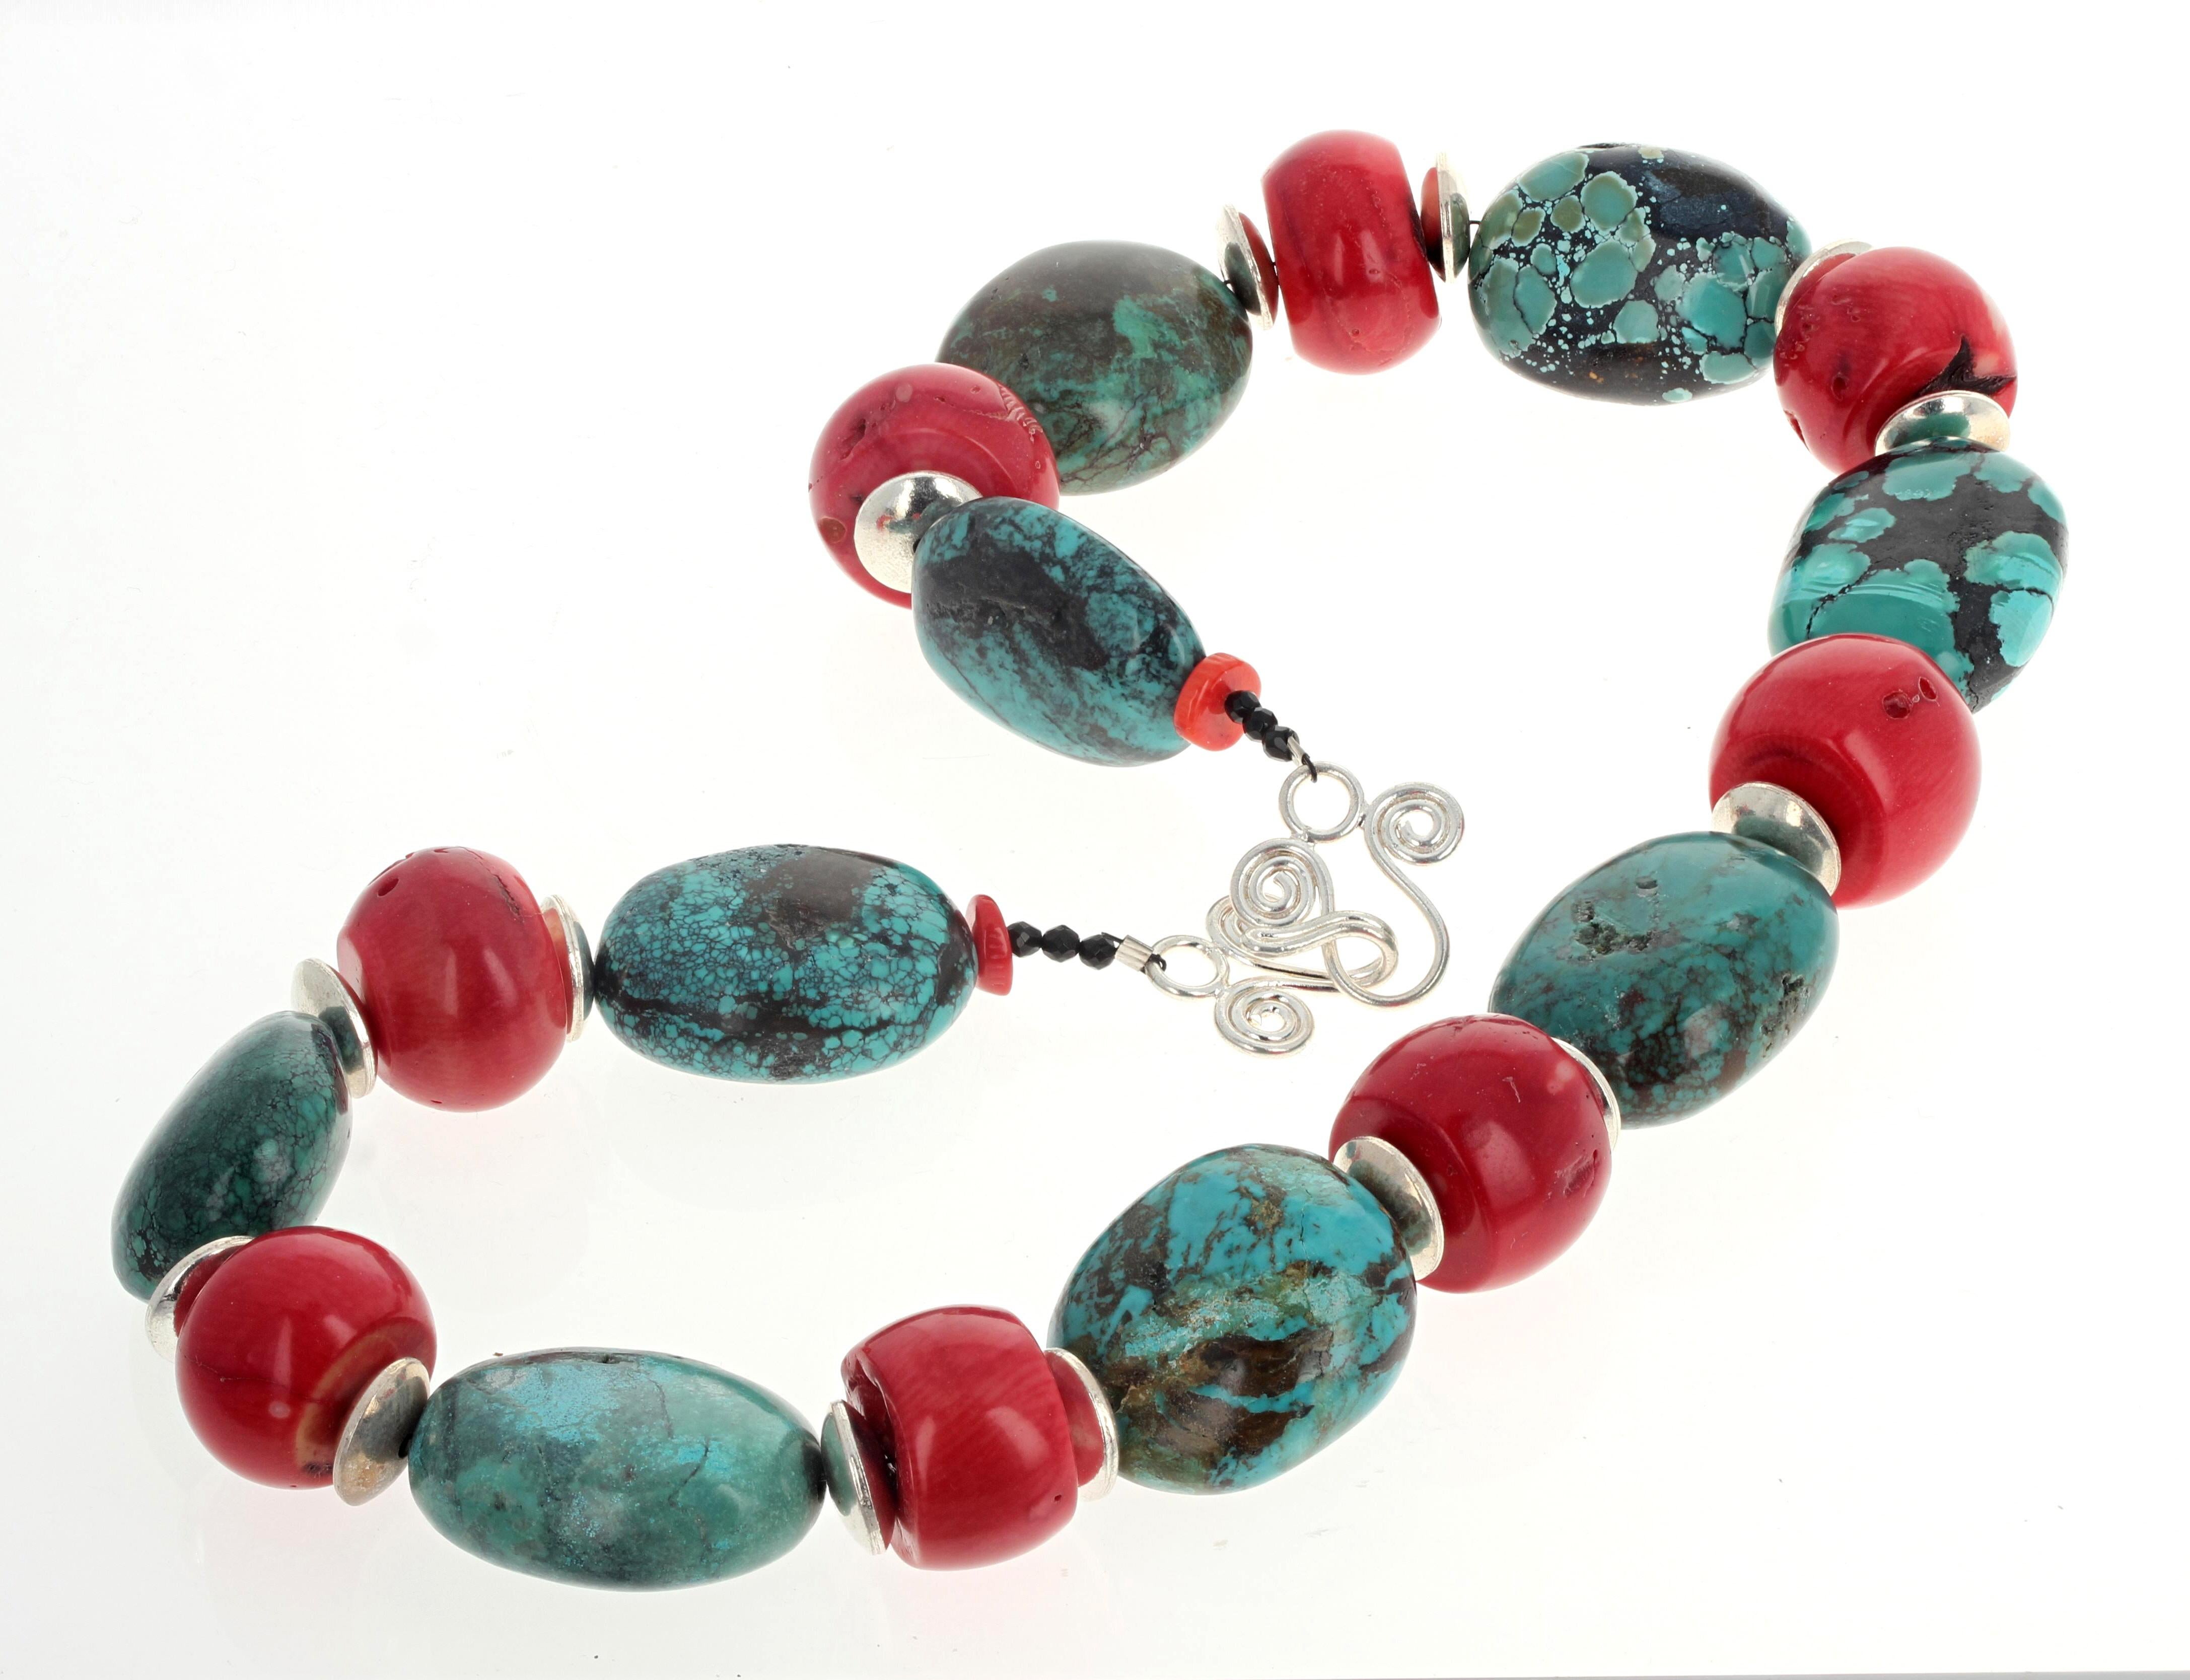 This beautiful single strand of highly polished natural Turquoise and real natural red Coral is 21 inches long.  The simple elegant spacers are silvery rondels (12mm).  The largest Coral is approximately 13mm round-ish and the largest Turquoise is